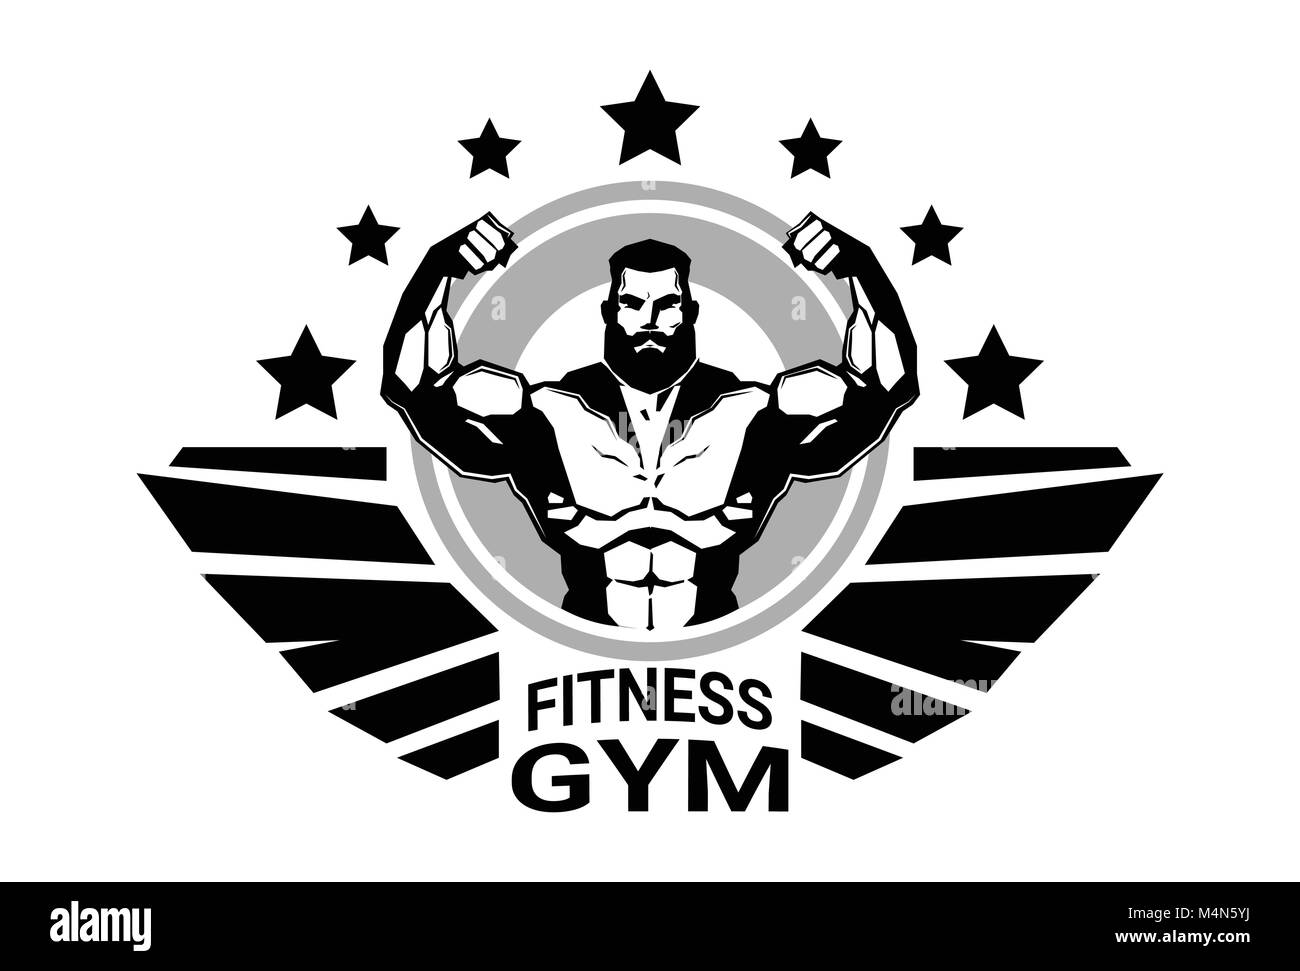 Fitness Club Or Gym Logo With Strong Athletic Man Bodybuilder Silhouette On White Background Stock Vector